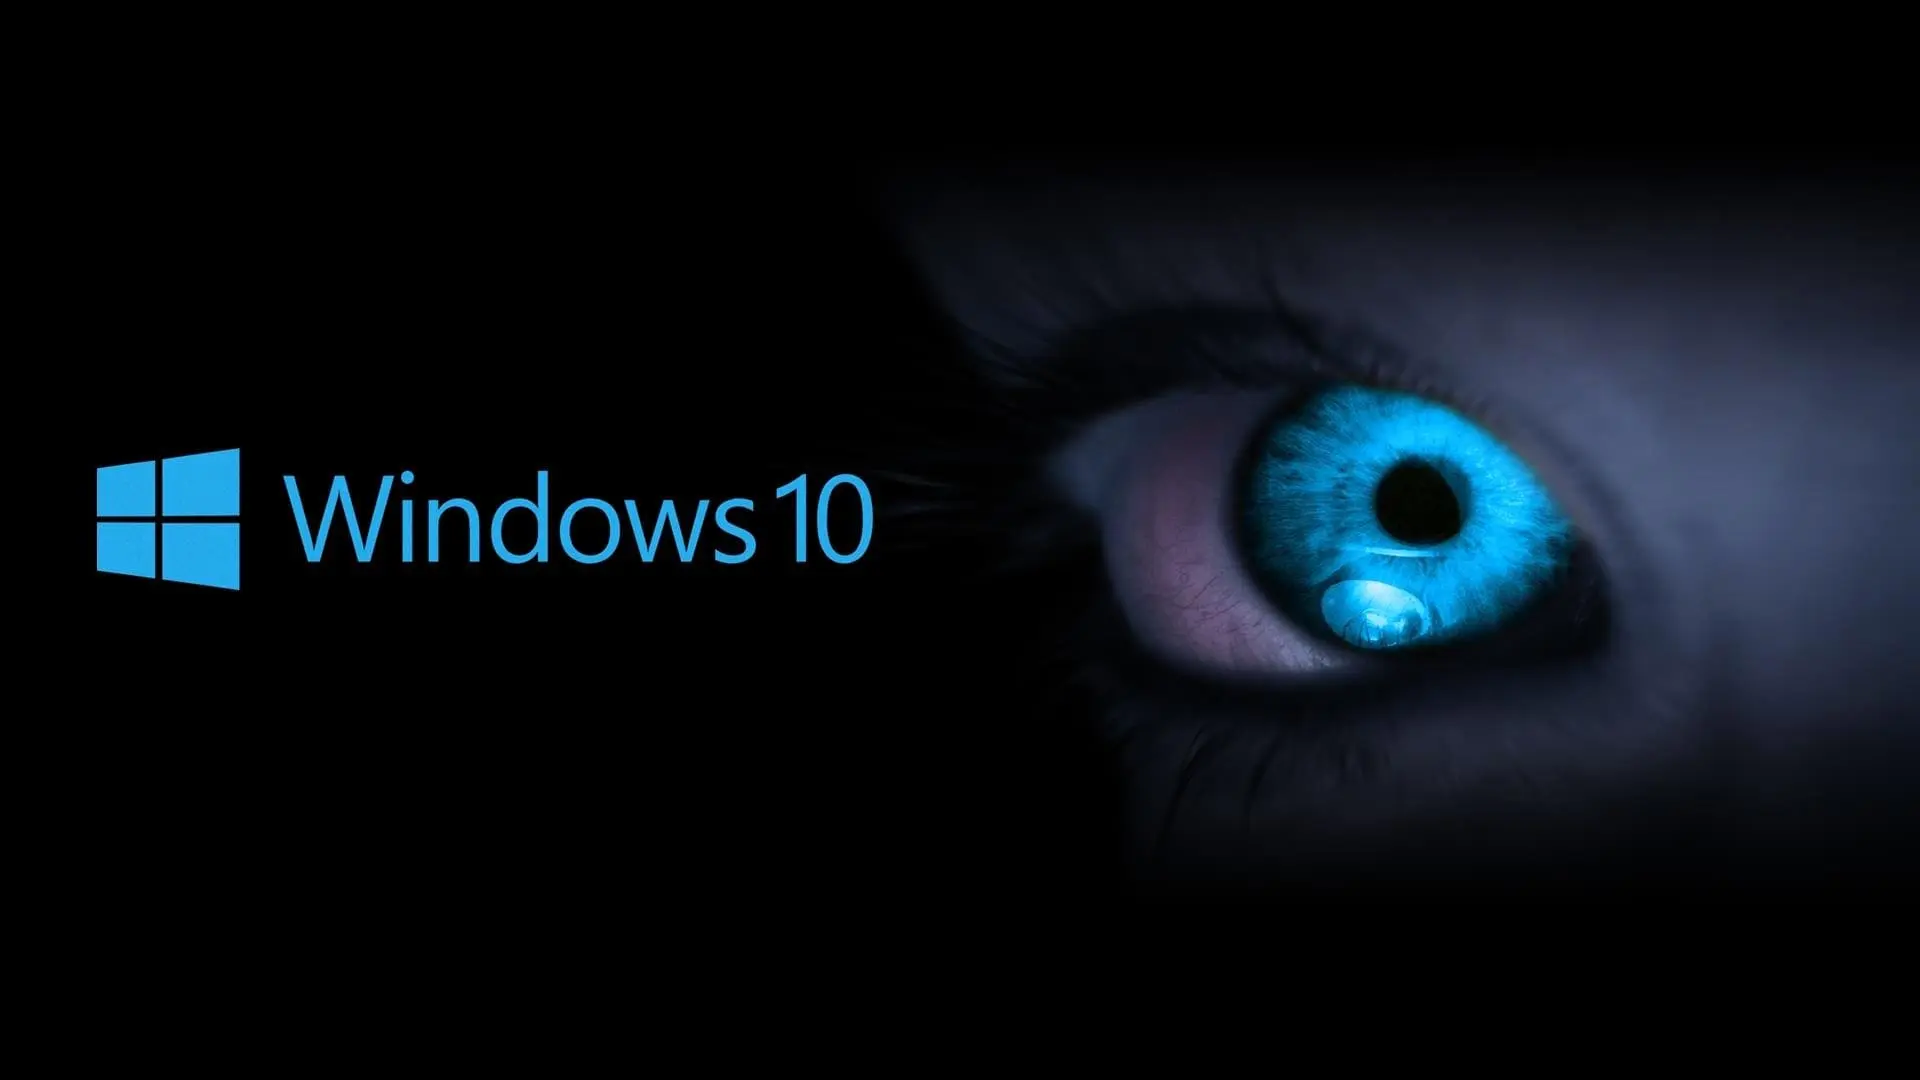 How Big Is Windows 10 And Why?